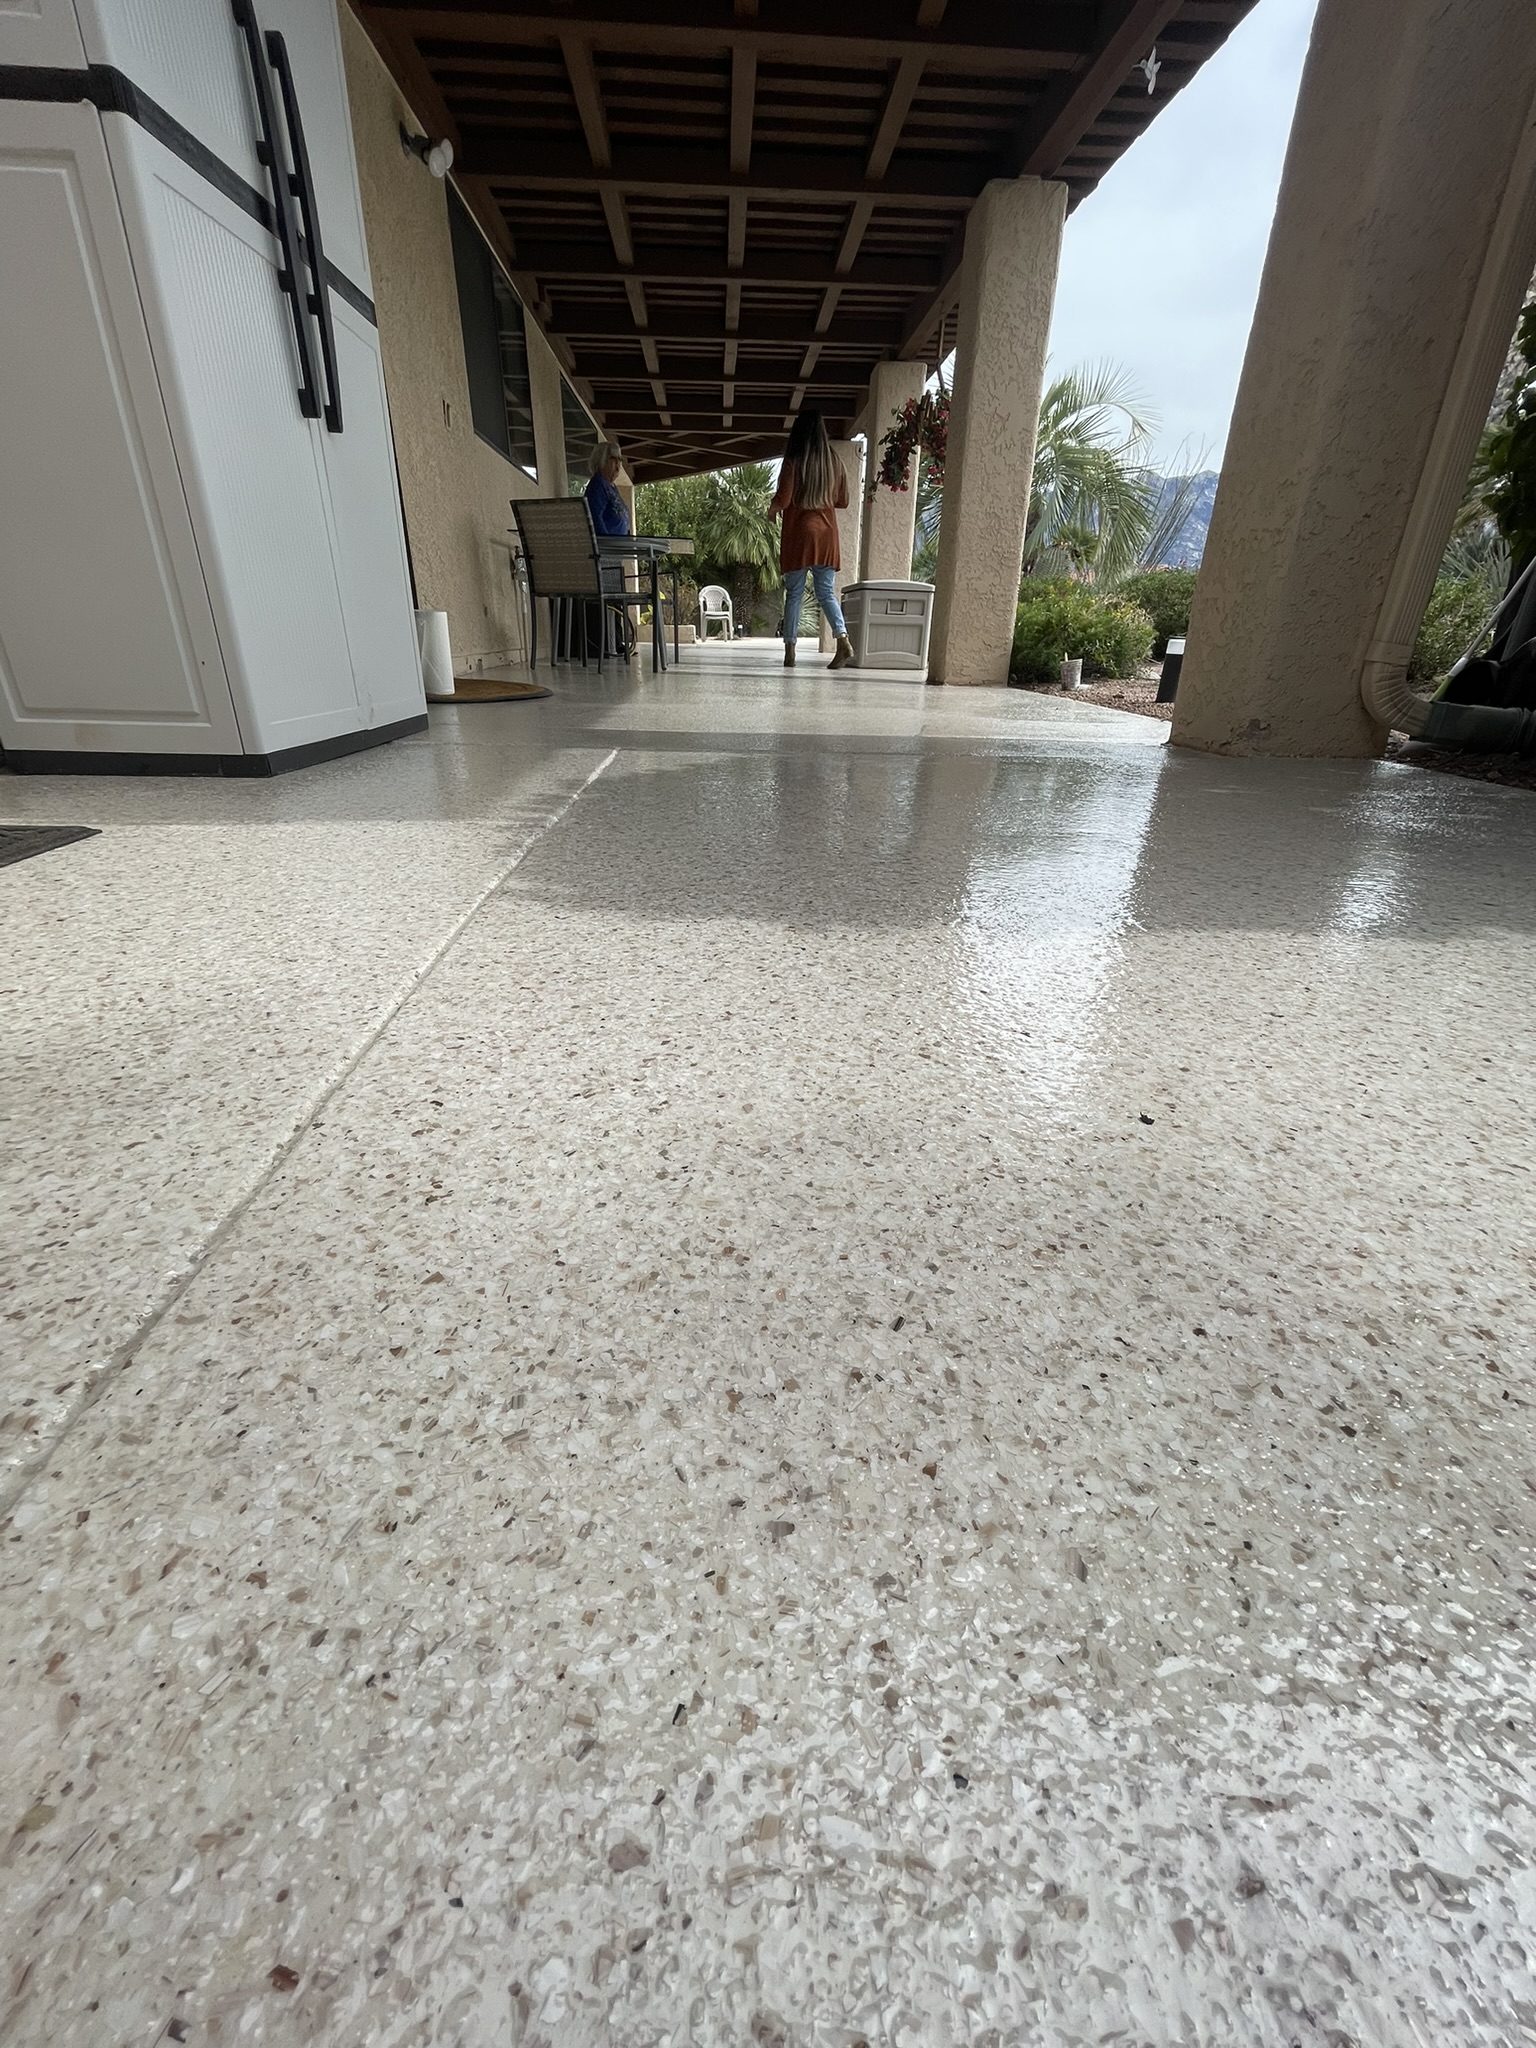 Outdoor Patio Concrete Crack Repair And Concrete Coating Completed in Saddlebrook, AZ